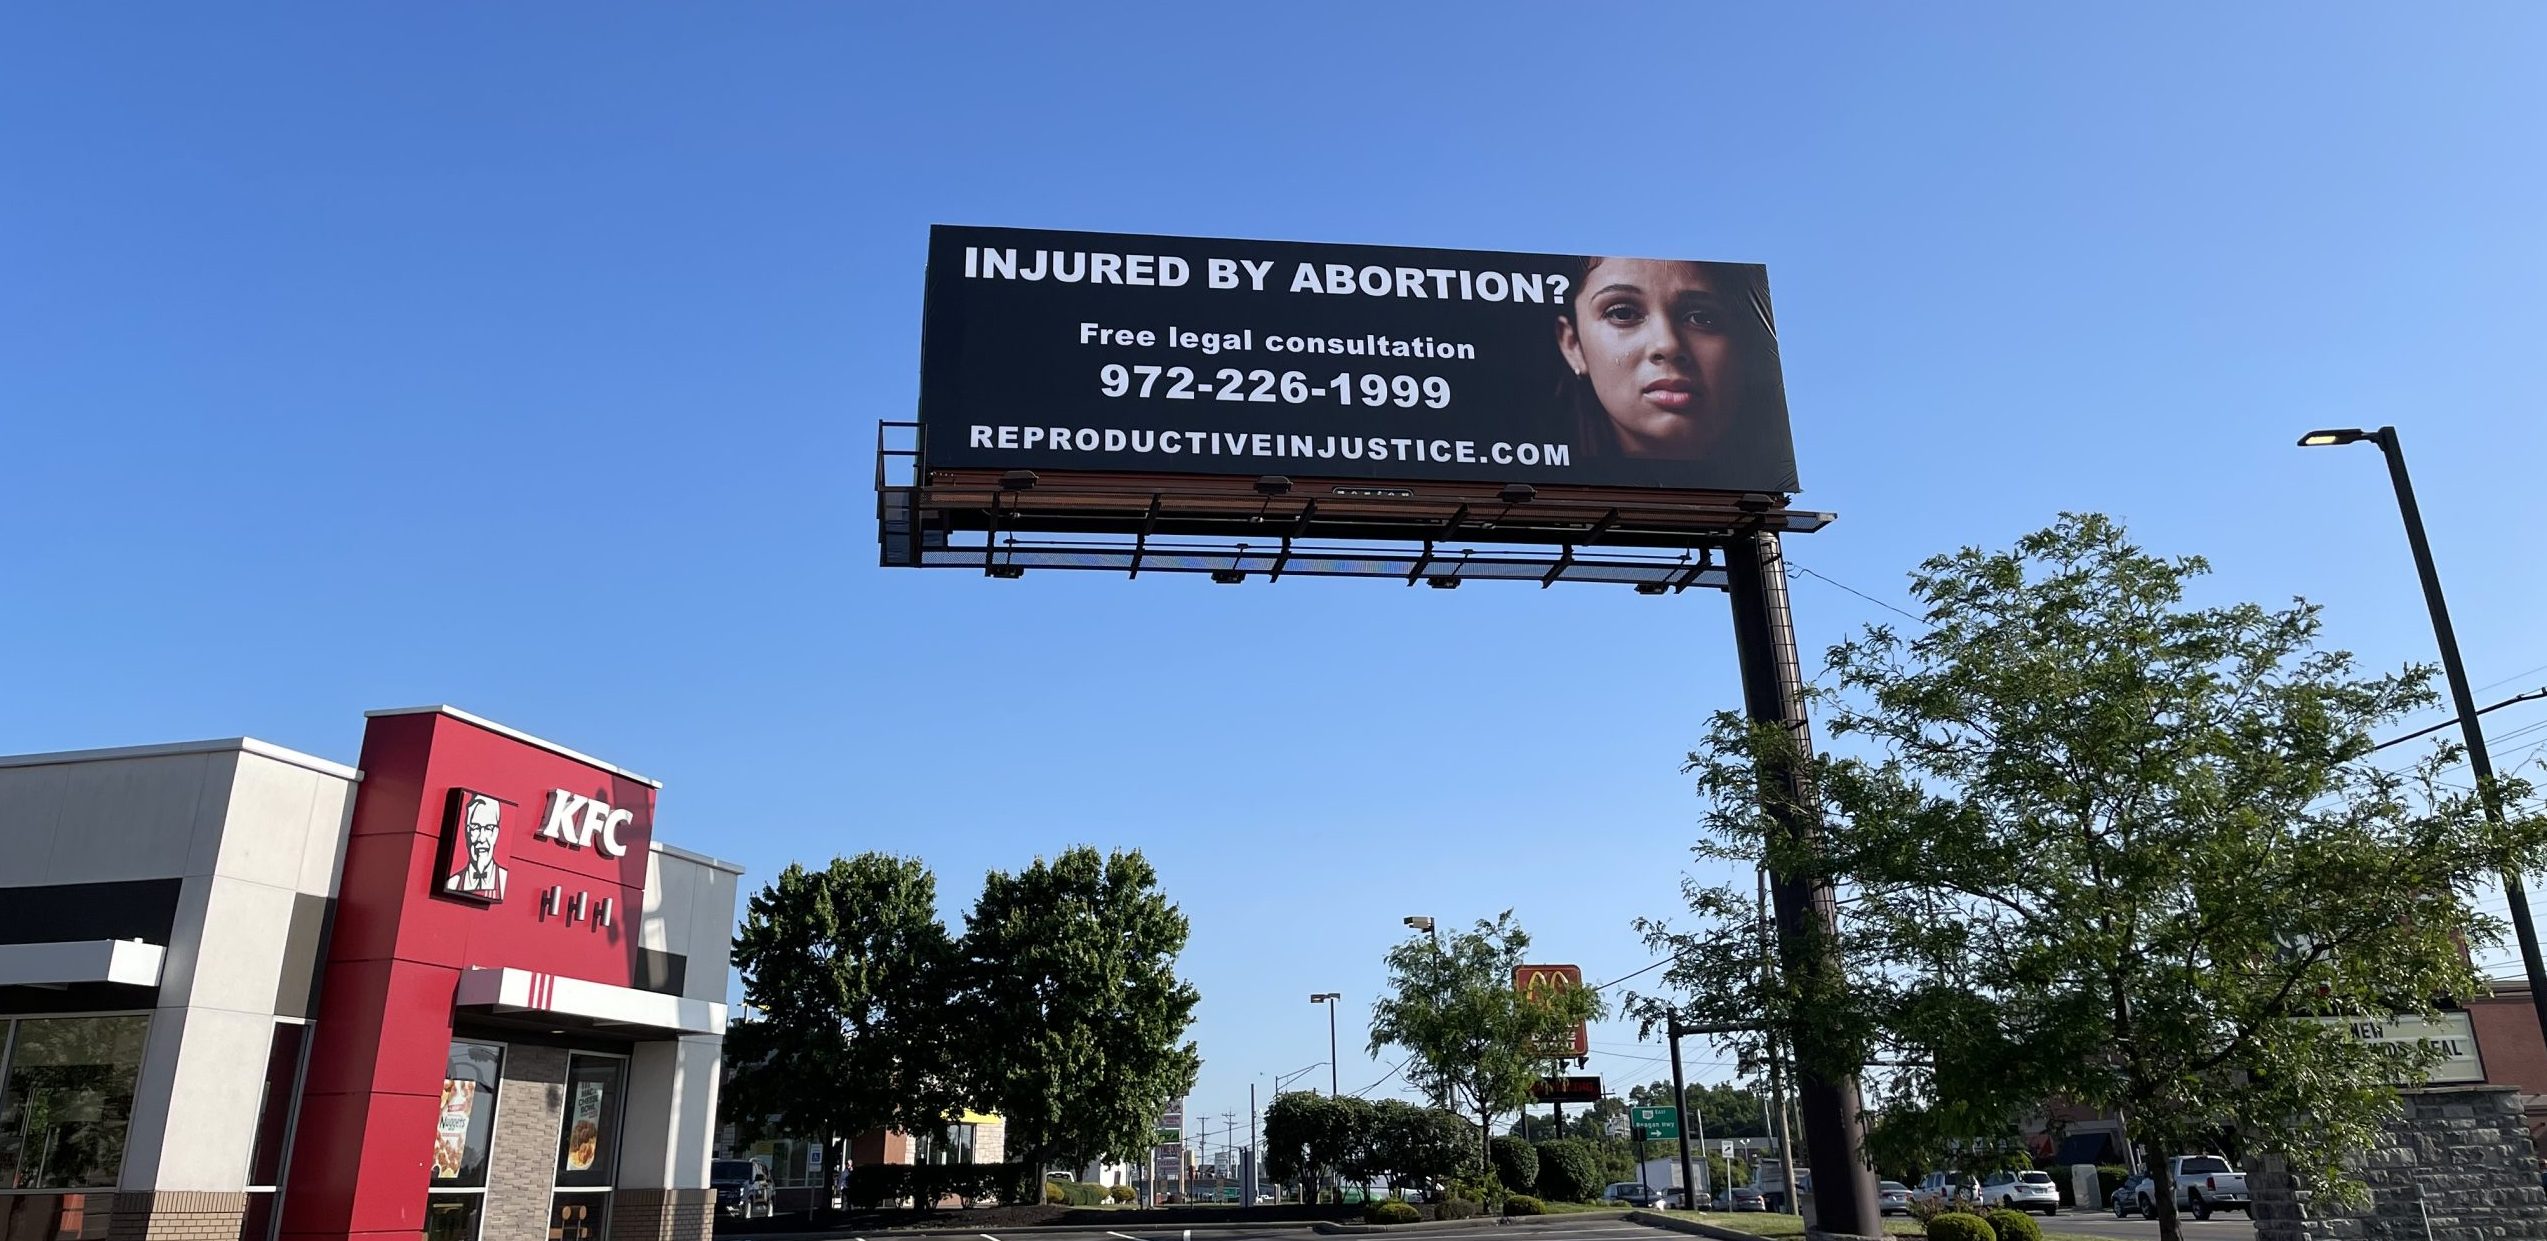 Reproductive Injustice Billboards advertise Injured by Abortion in Ohio